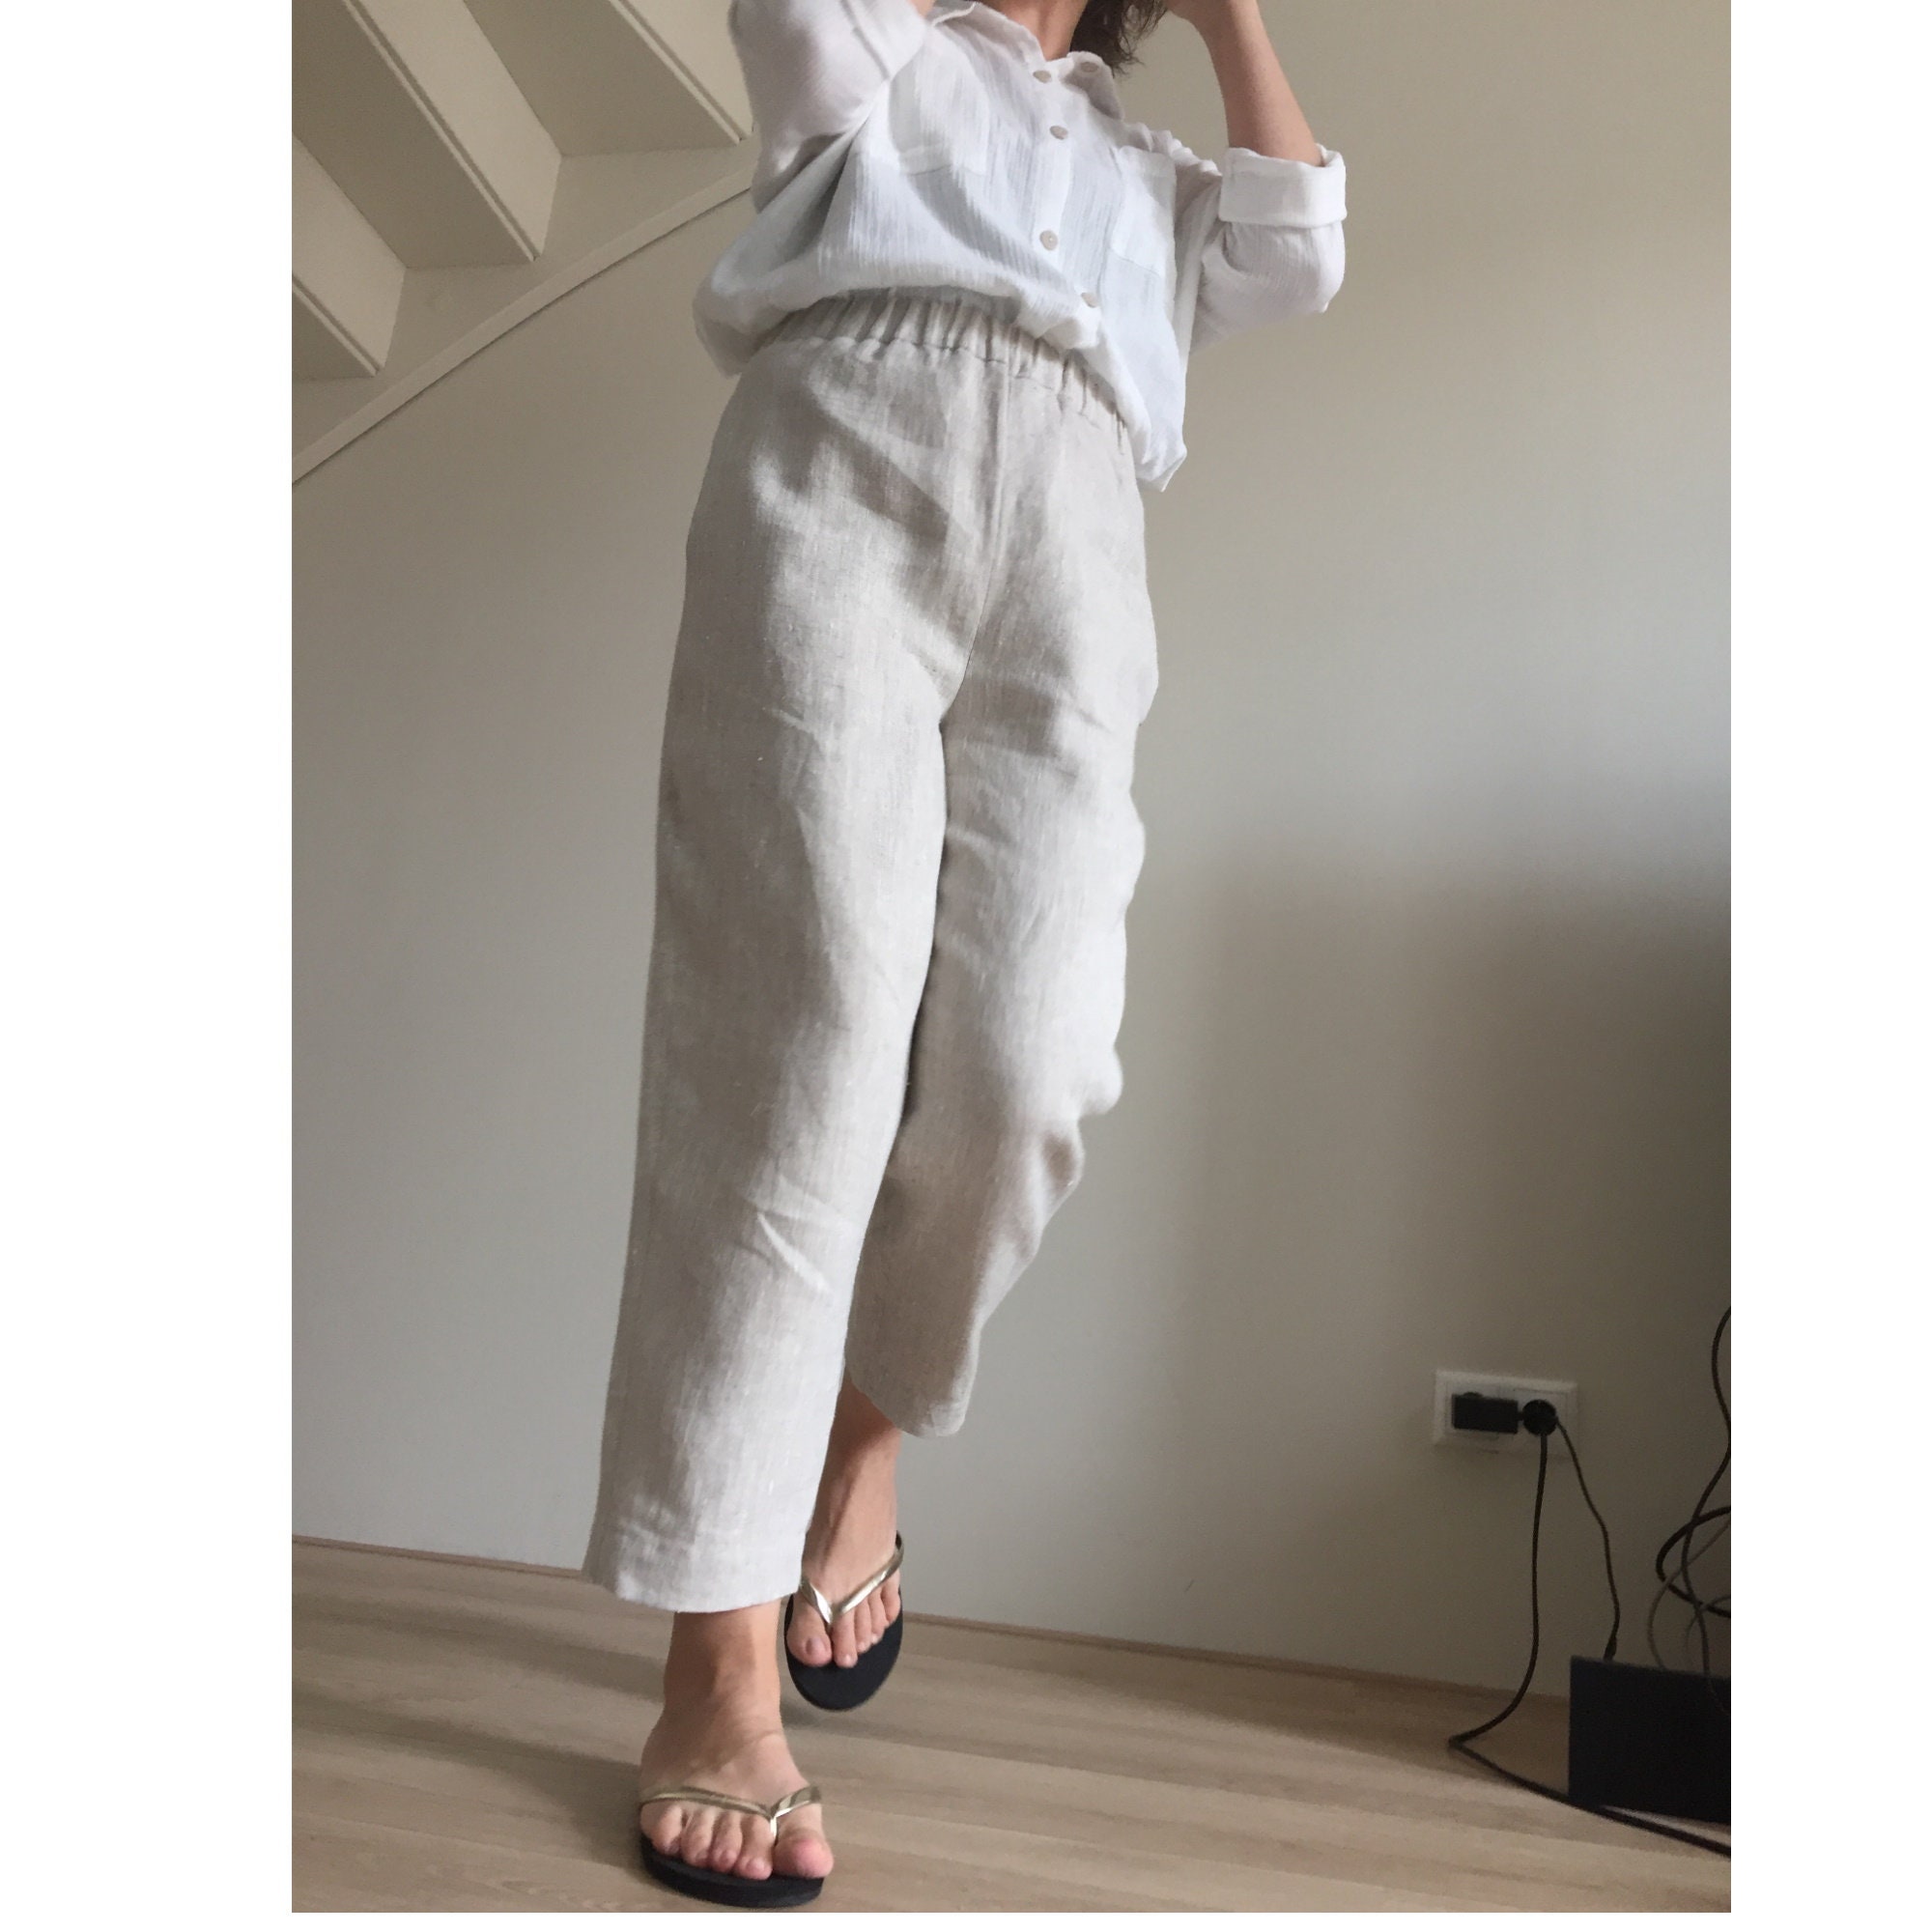 Womens Linen Trousers Pants High Waisted Elastic Waistband Inseam Pockets  PDF Sewing Pattern Ankles Length Sizes : Us 2 22, Eu 34 54 